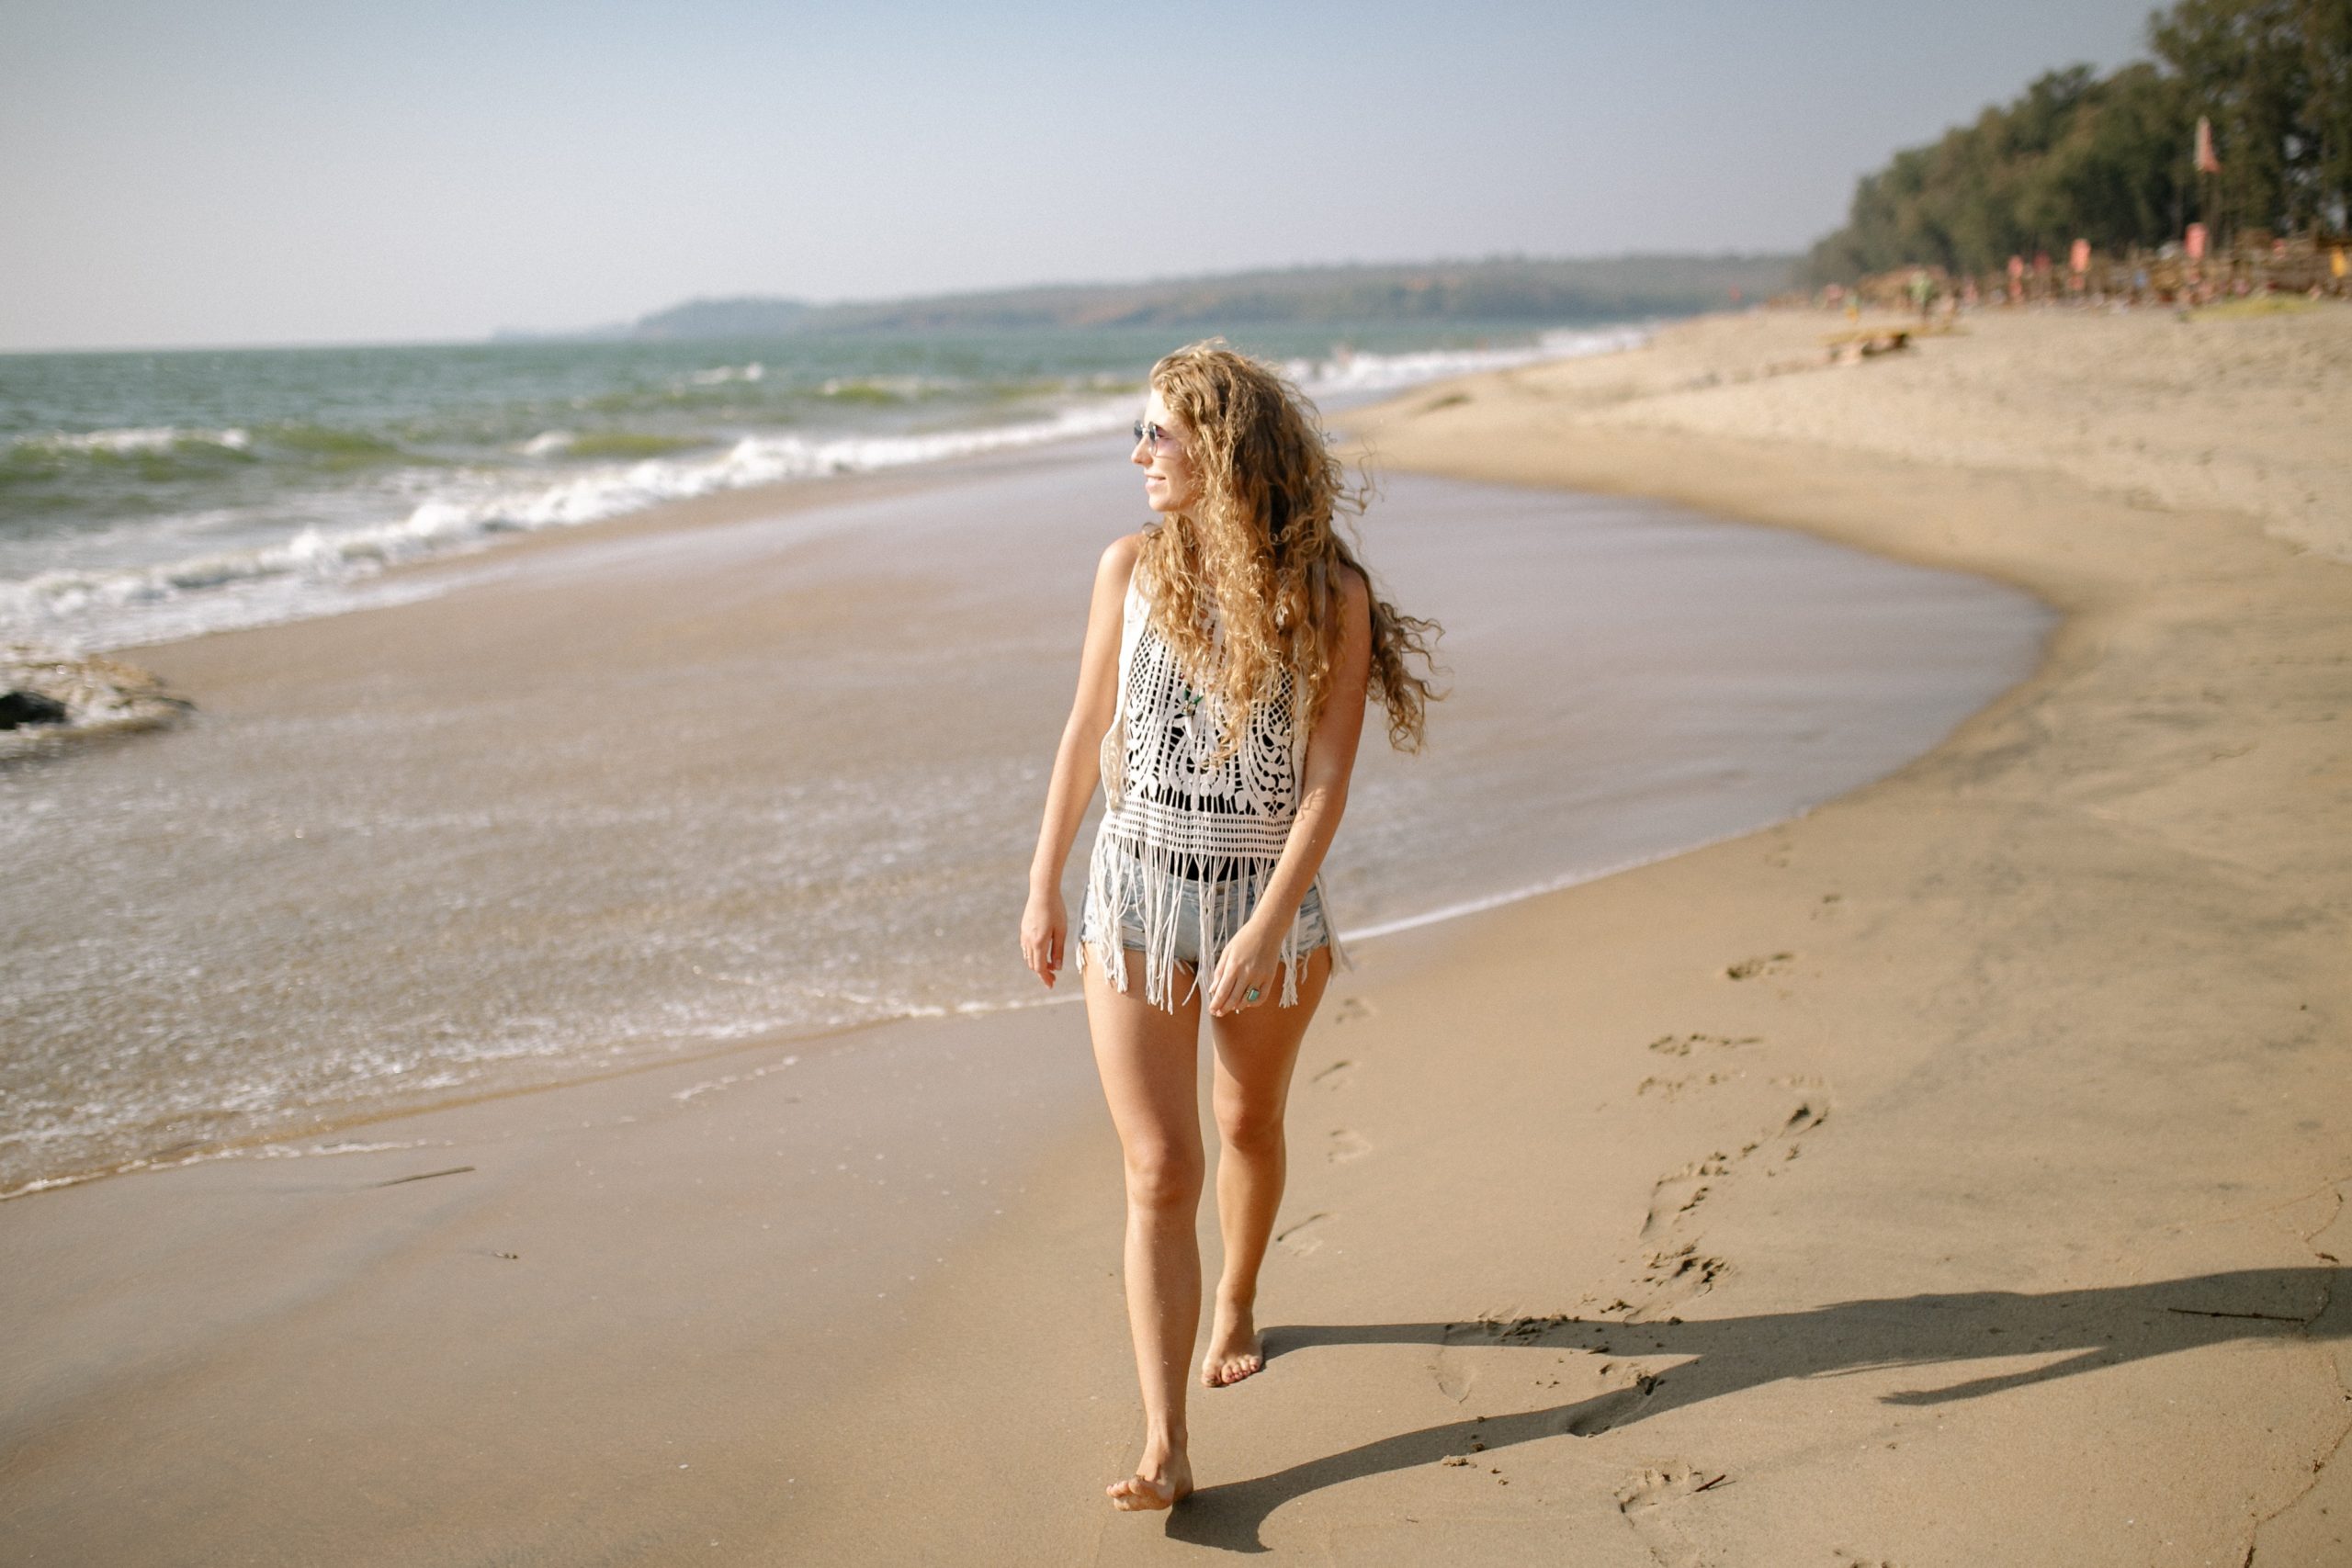 Walking on the beach: 5 benefits of walking barefoot on the beach sand.